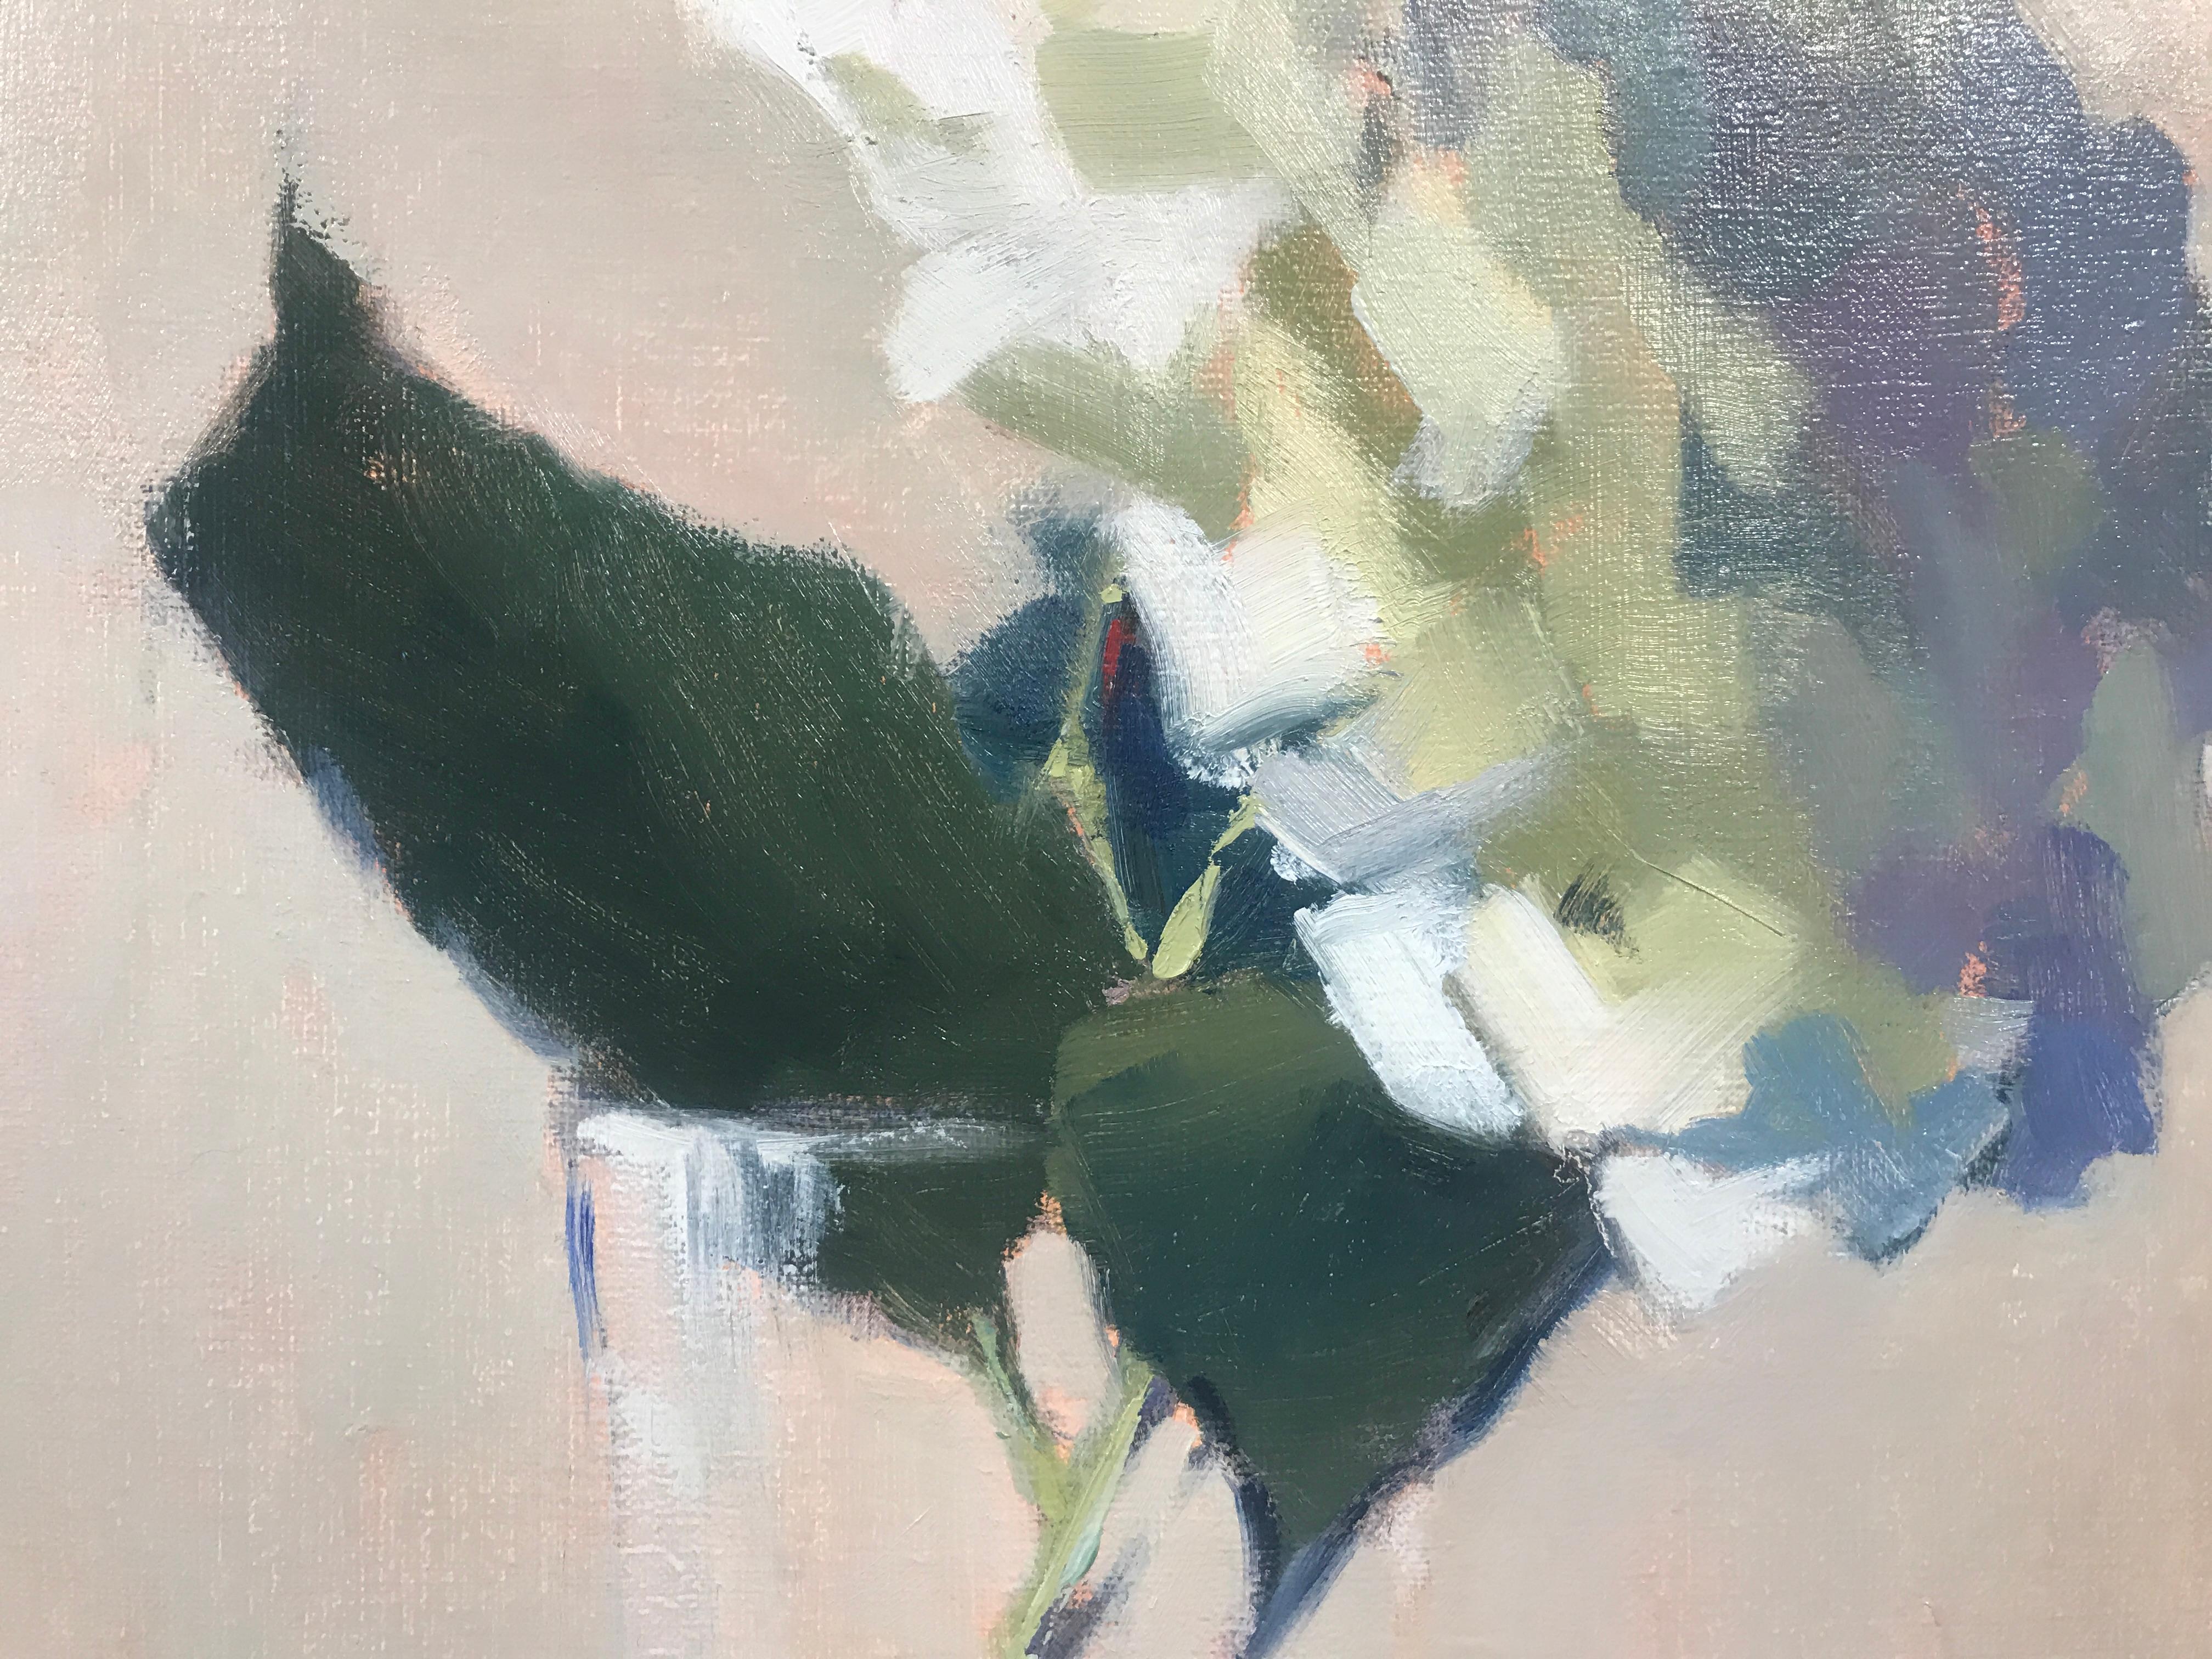 Hydrangea, Looking Forward by Lesley Powell, Small Post-Impressionist Painting 1